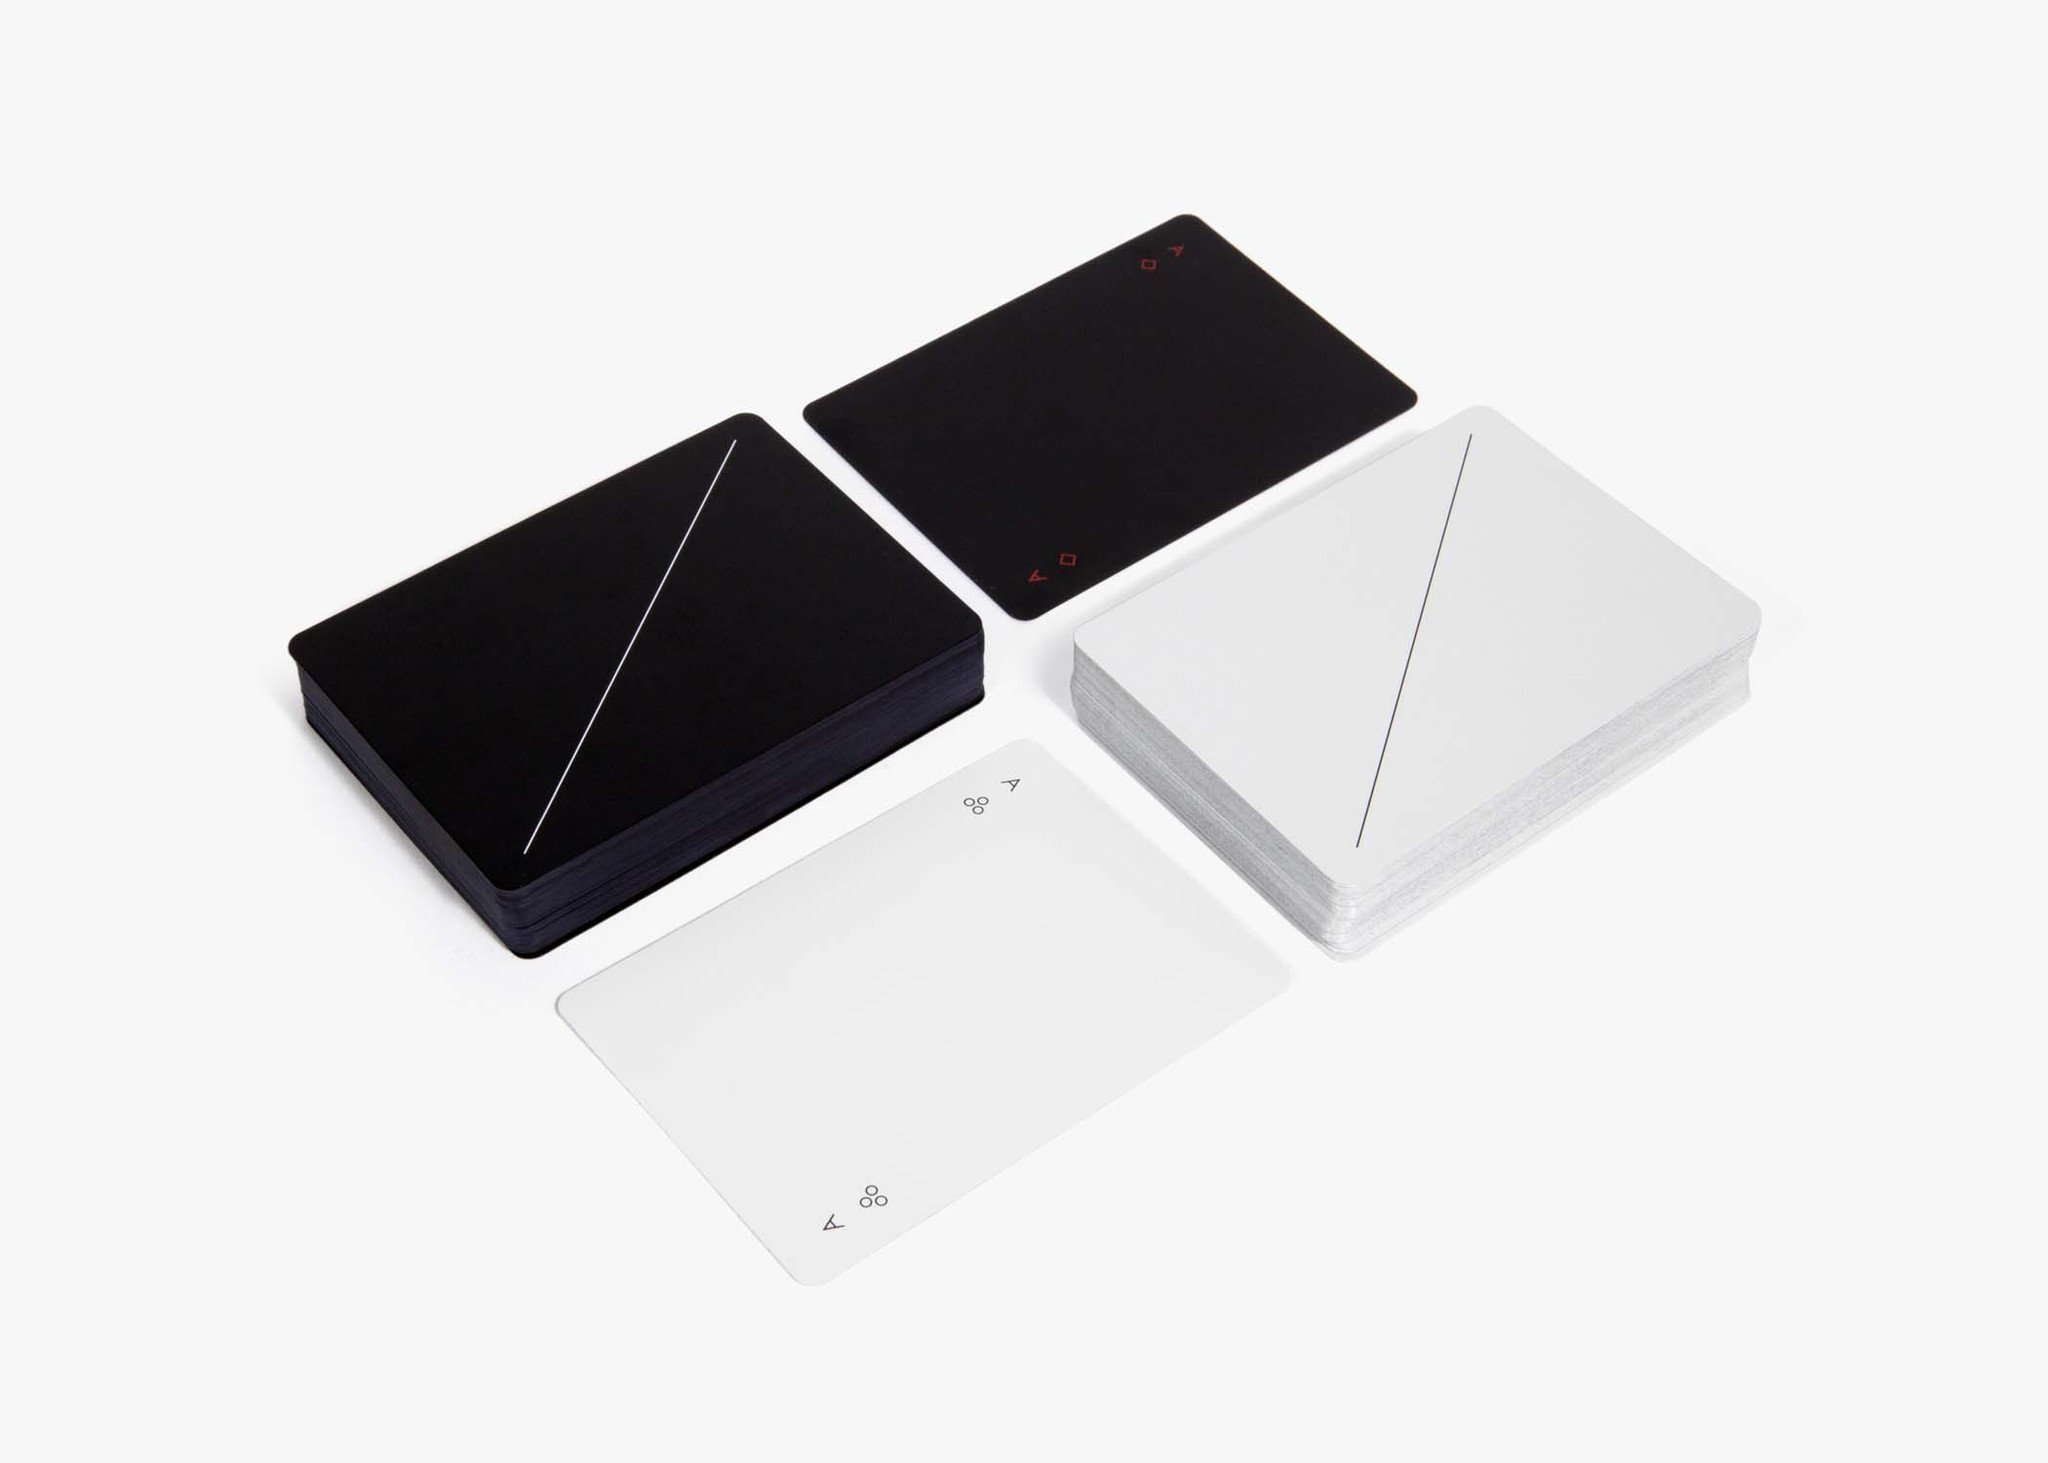 A Black and a White Deck of Minim Playing Cards